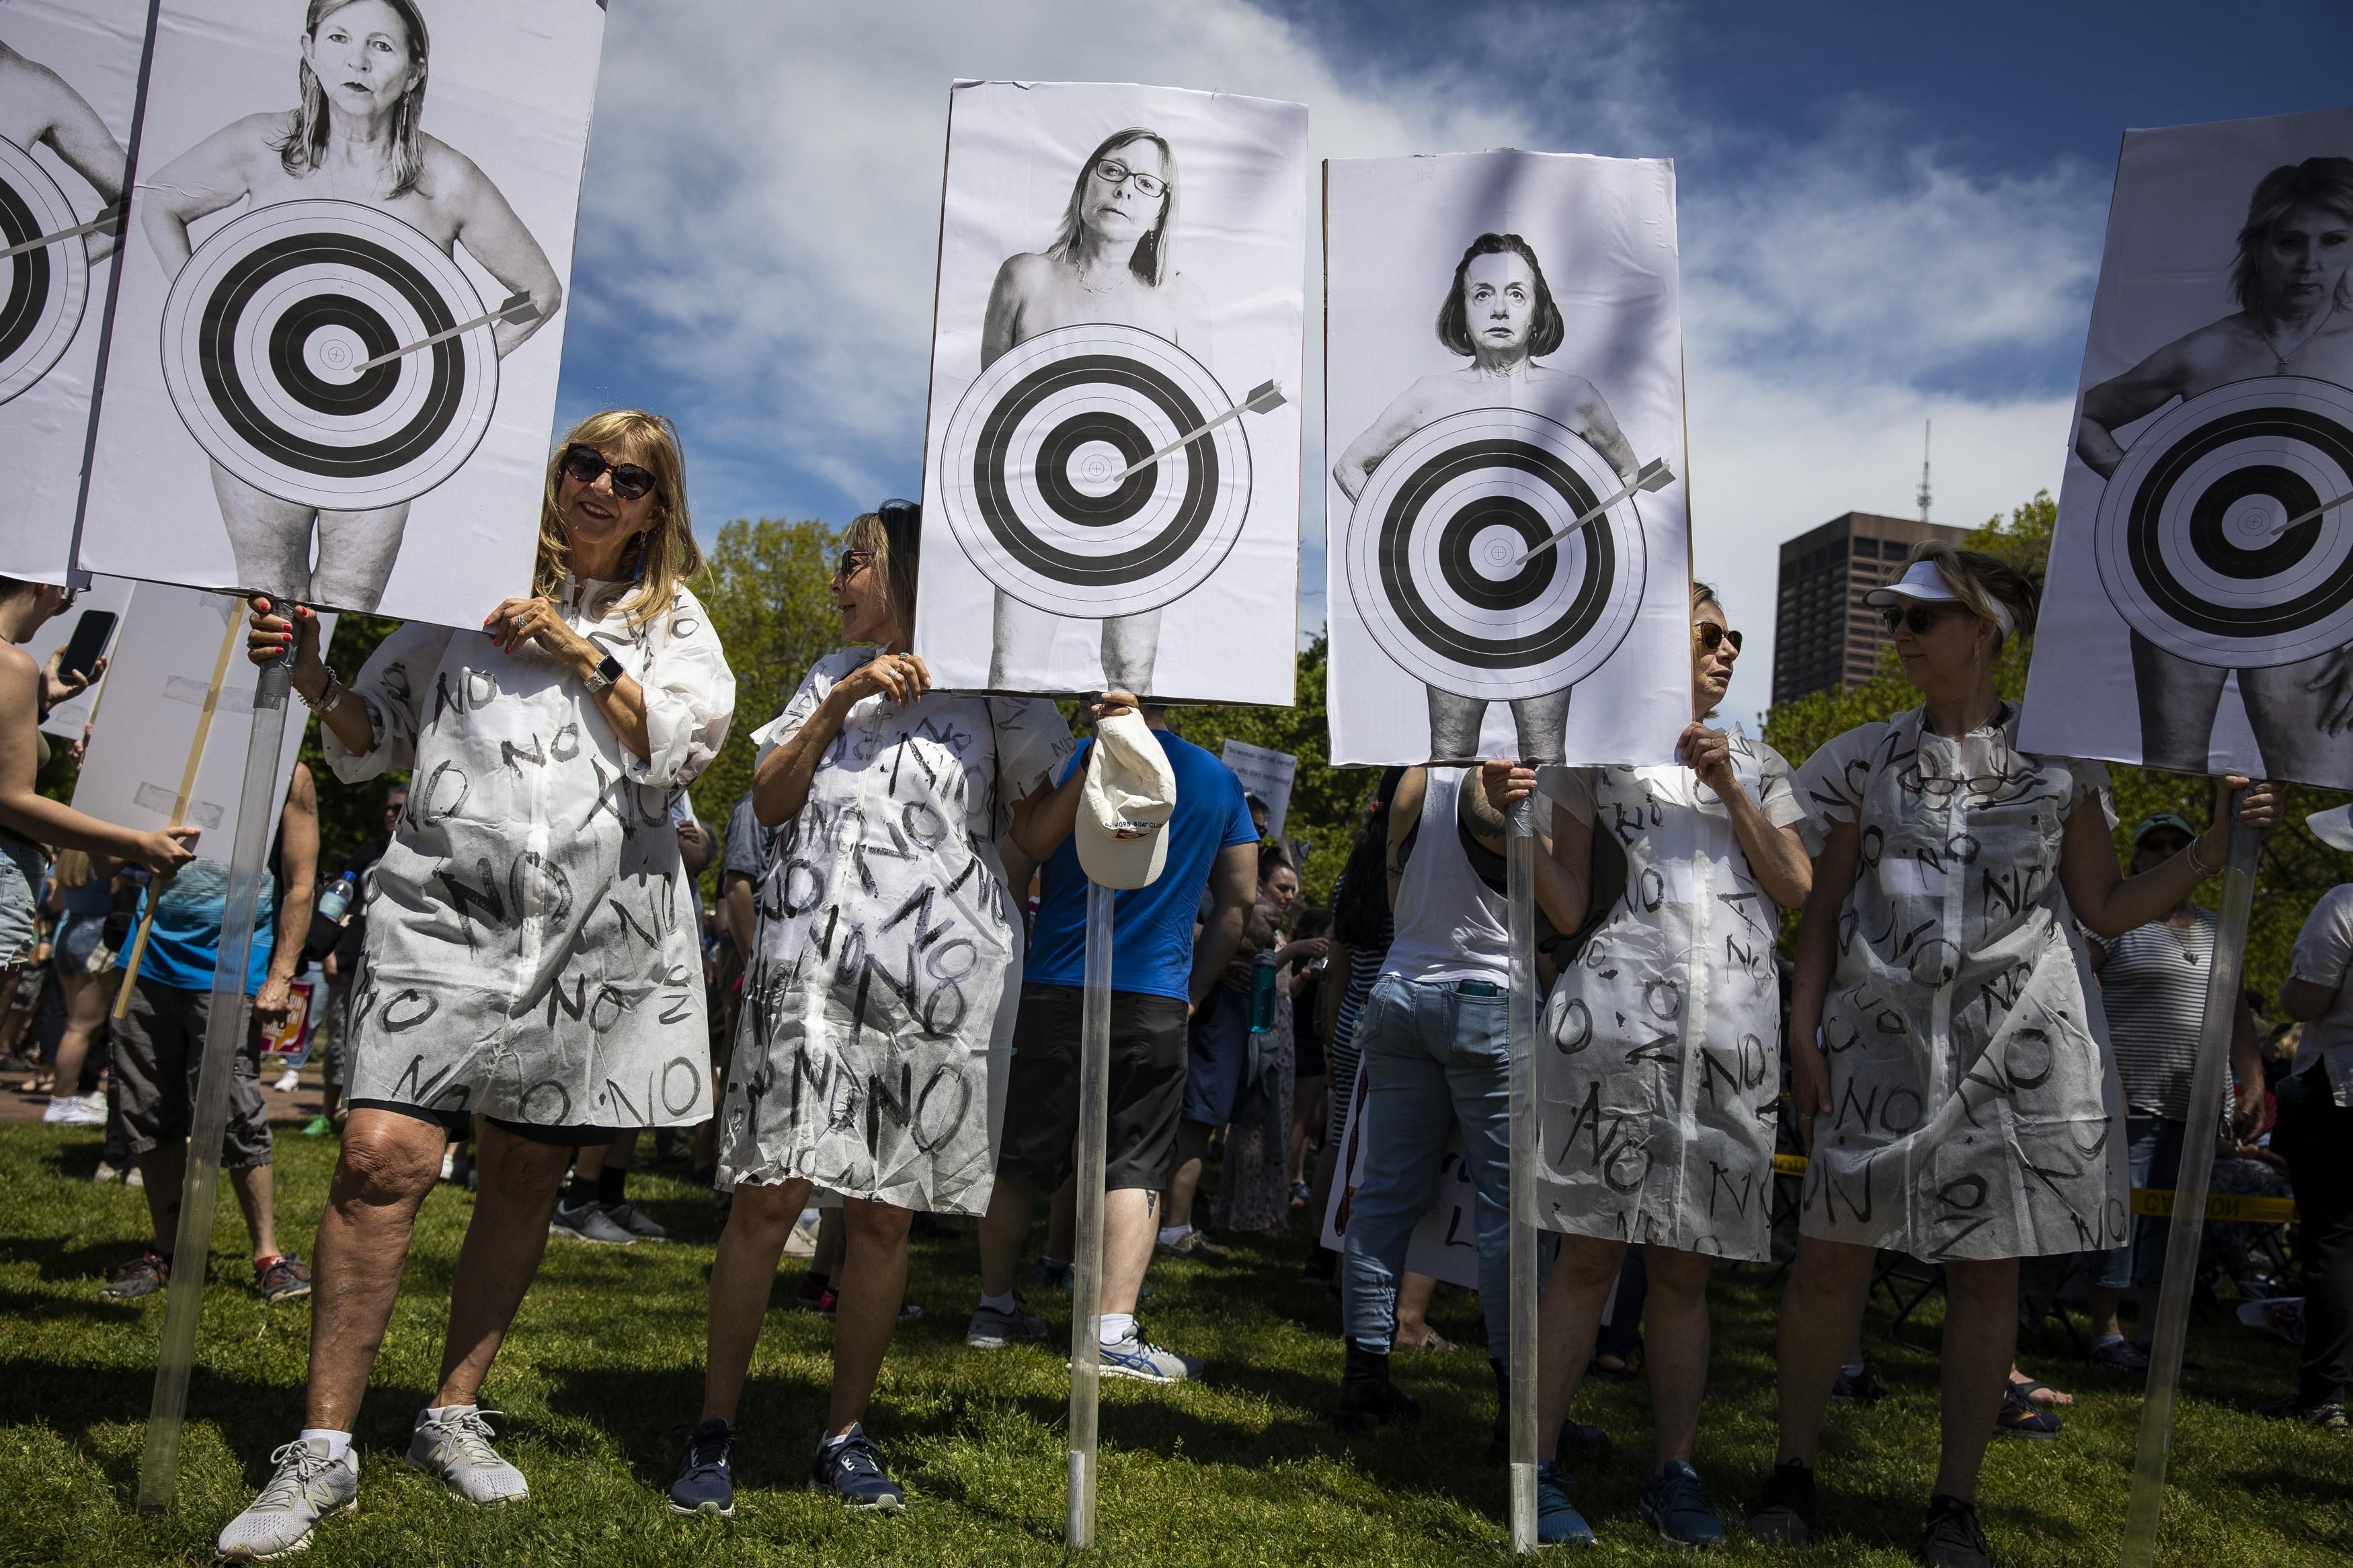 Pro-choice demonstrators with posters showing bullseyes on women's bodies